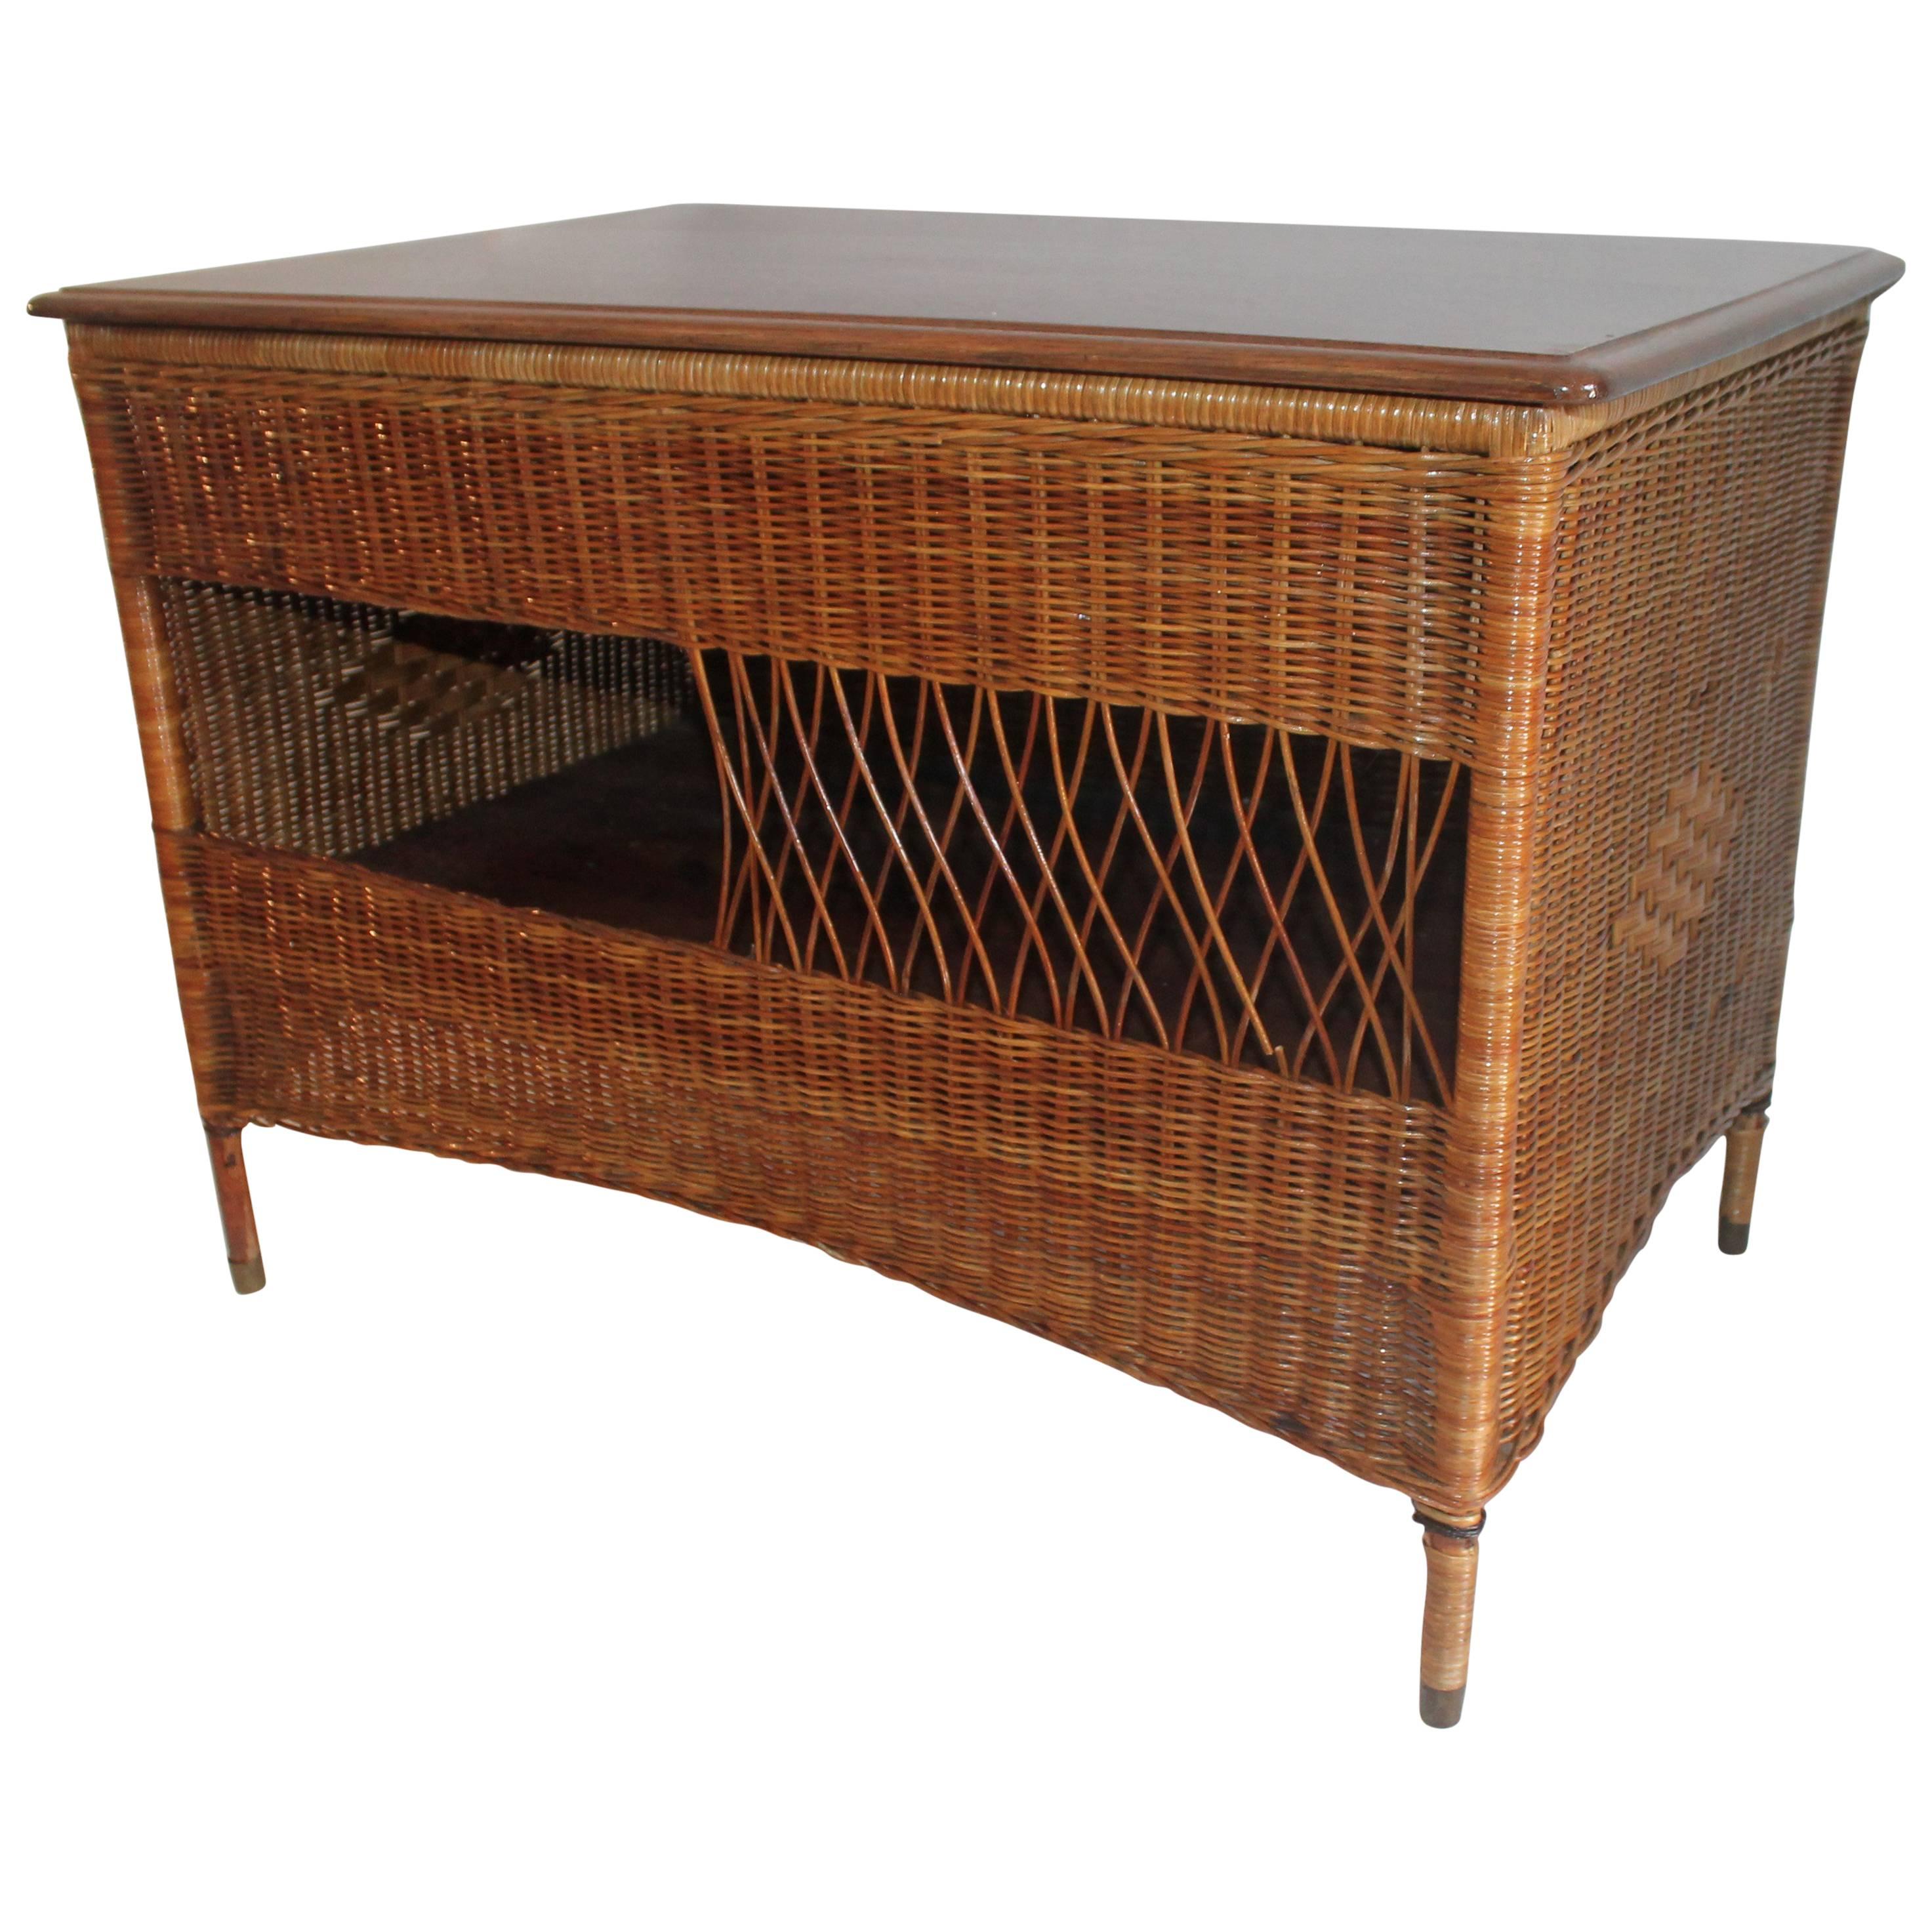 Wicker Work Table with Lift Top